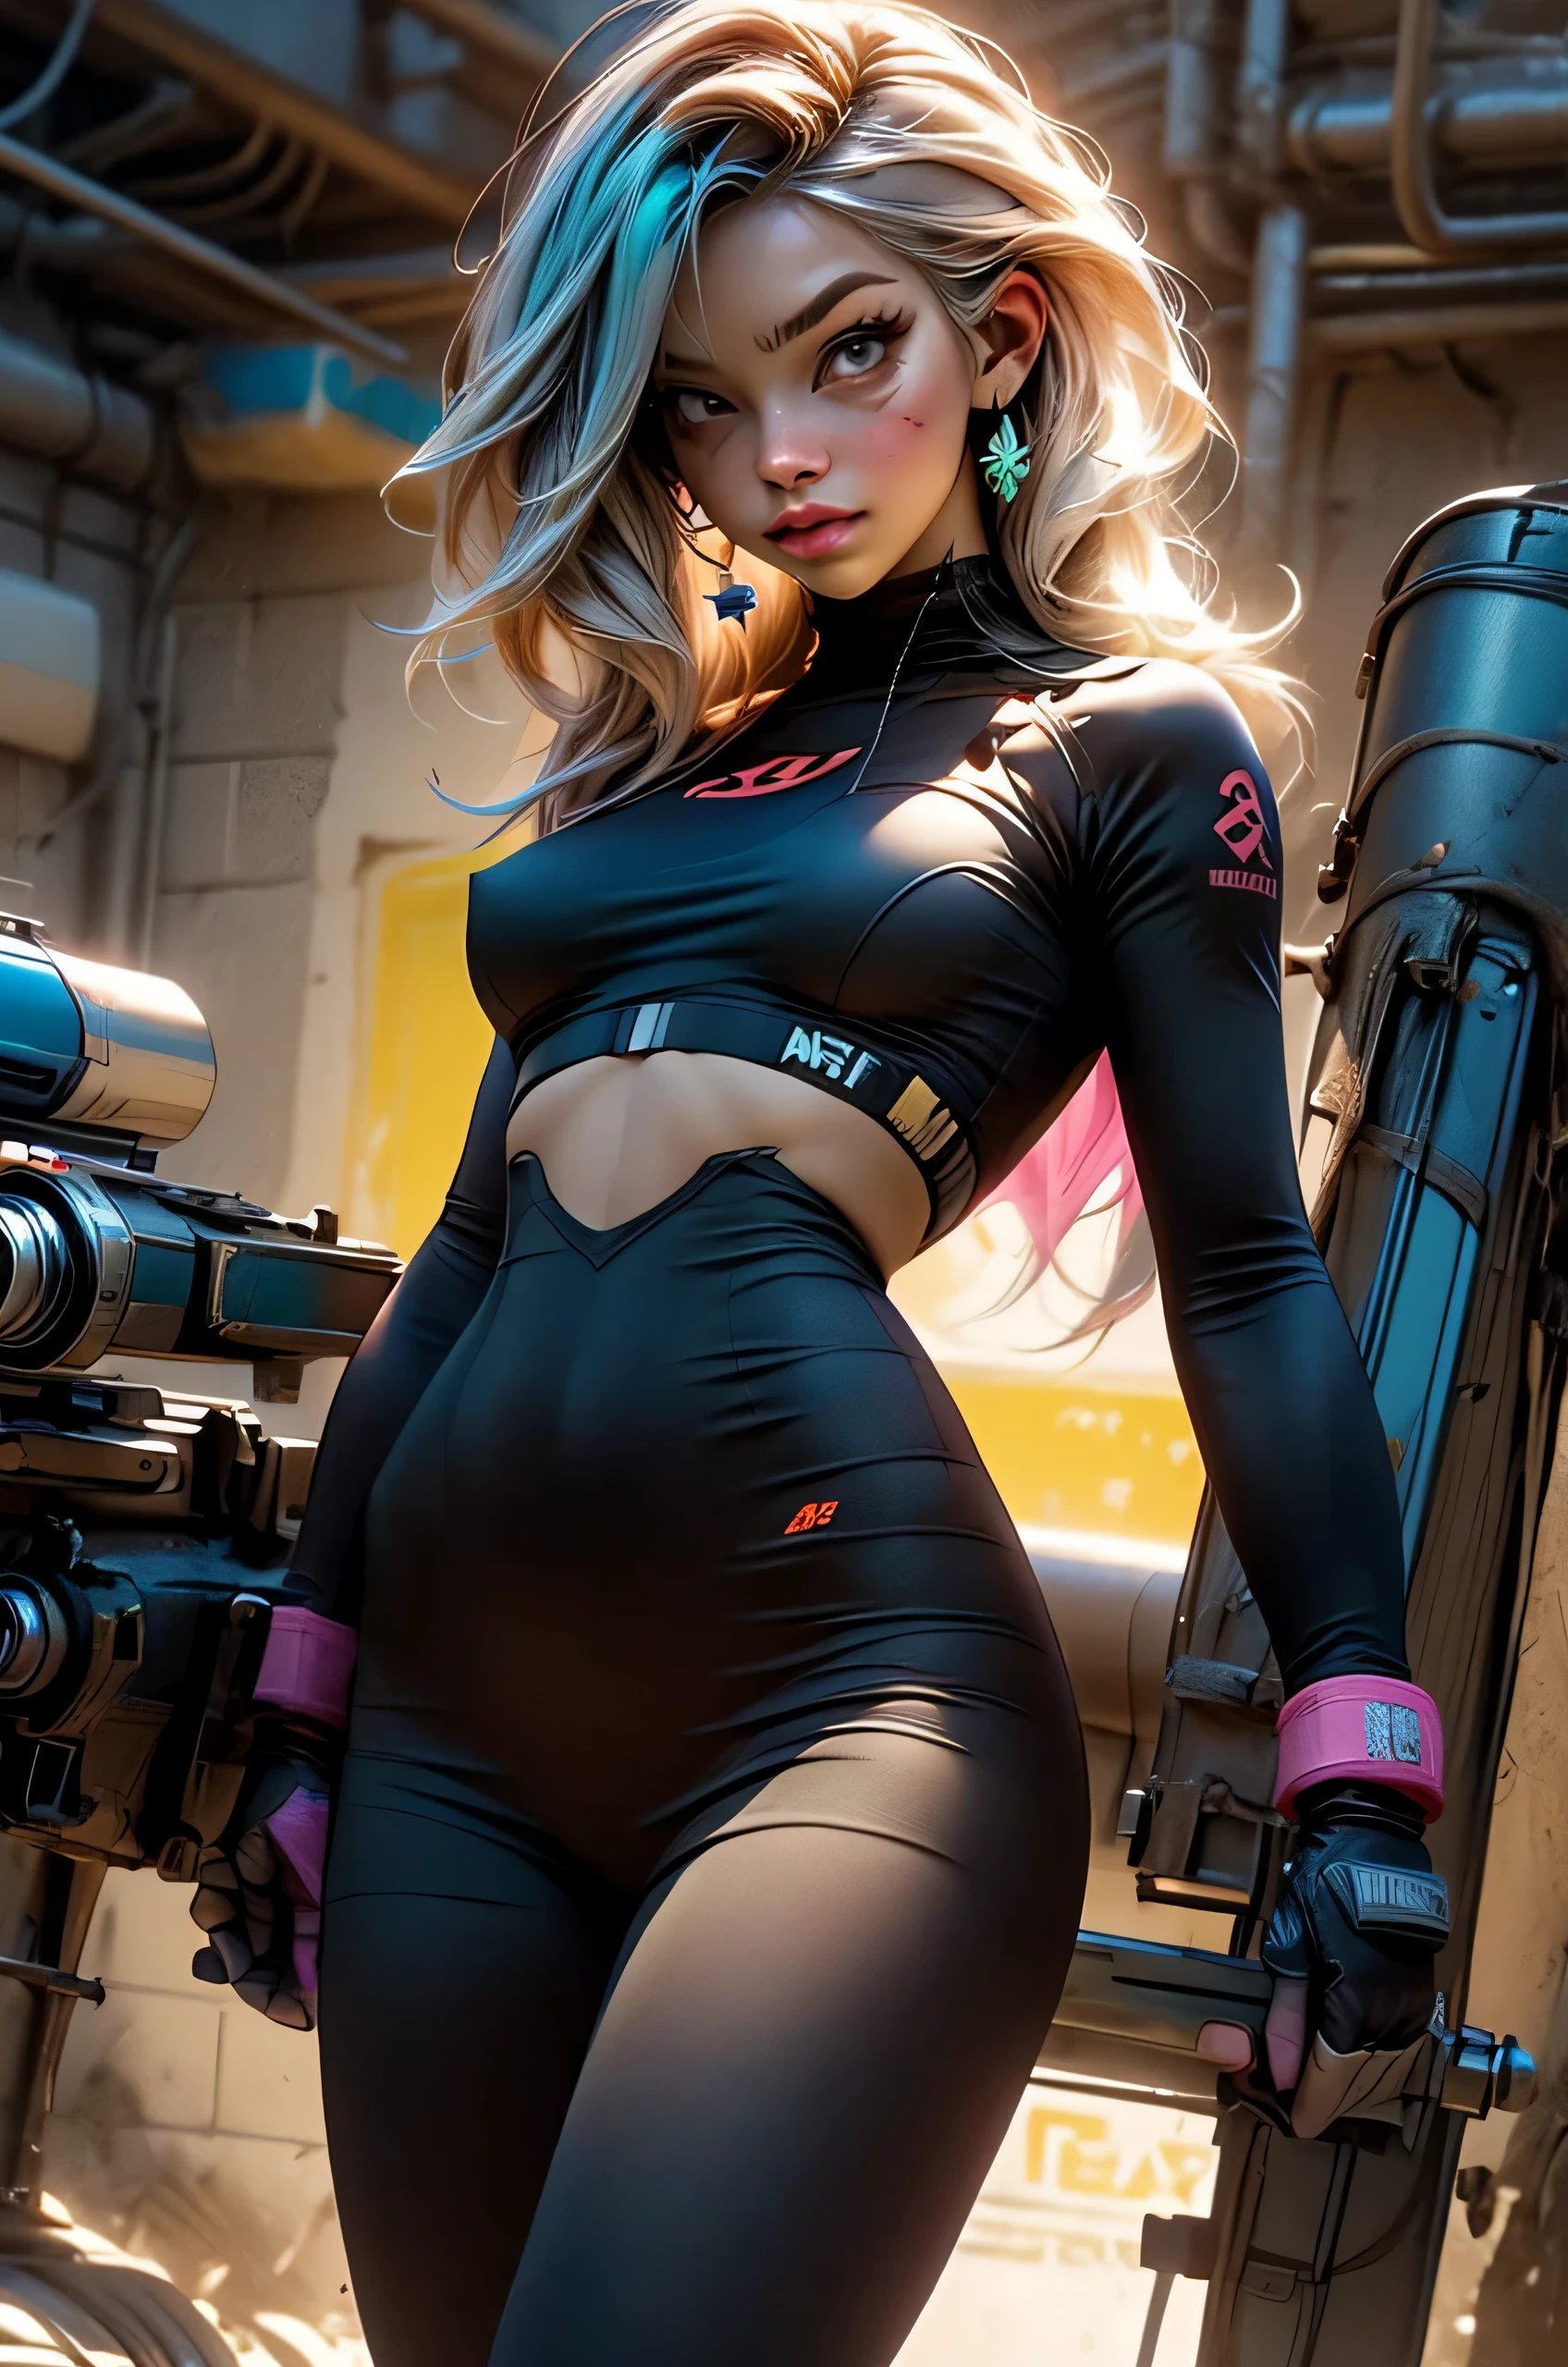 unreal engine:1.4,CG K ultra realistic, photorealistic:1.4, skin texture:1.4, artwork 1girl, Gatling gun, Casing, looking at viewer, dynamic pose, Blows, ammunition belt, gloves, large breasts not disproportionate, shooting , extremely detailed:1.4, more detailed, optical mix, playful patterns, animated texture, unique visual effect, or cyberpunk yellow color, red pantyhose, yellow leather miniskirt, masterpiece, ((colors, cyan, greens, pink, brown: 1.2)), 8k realistic digital art)), 32k